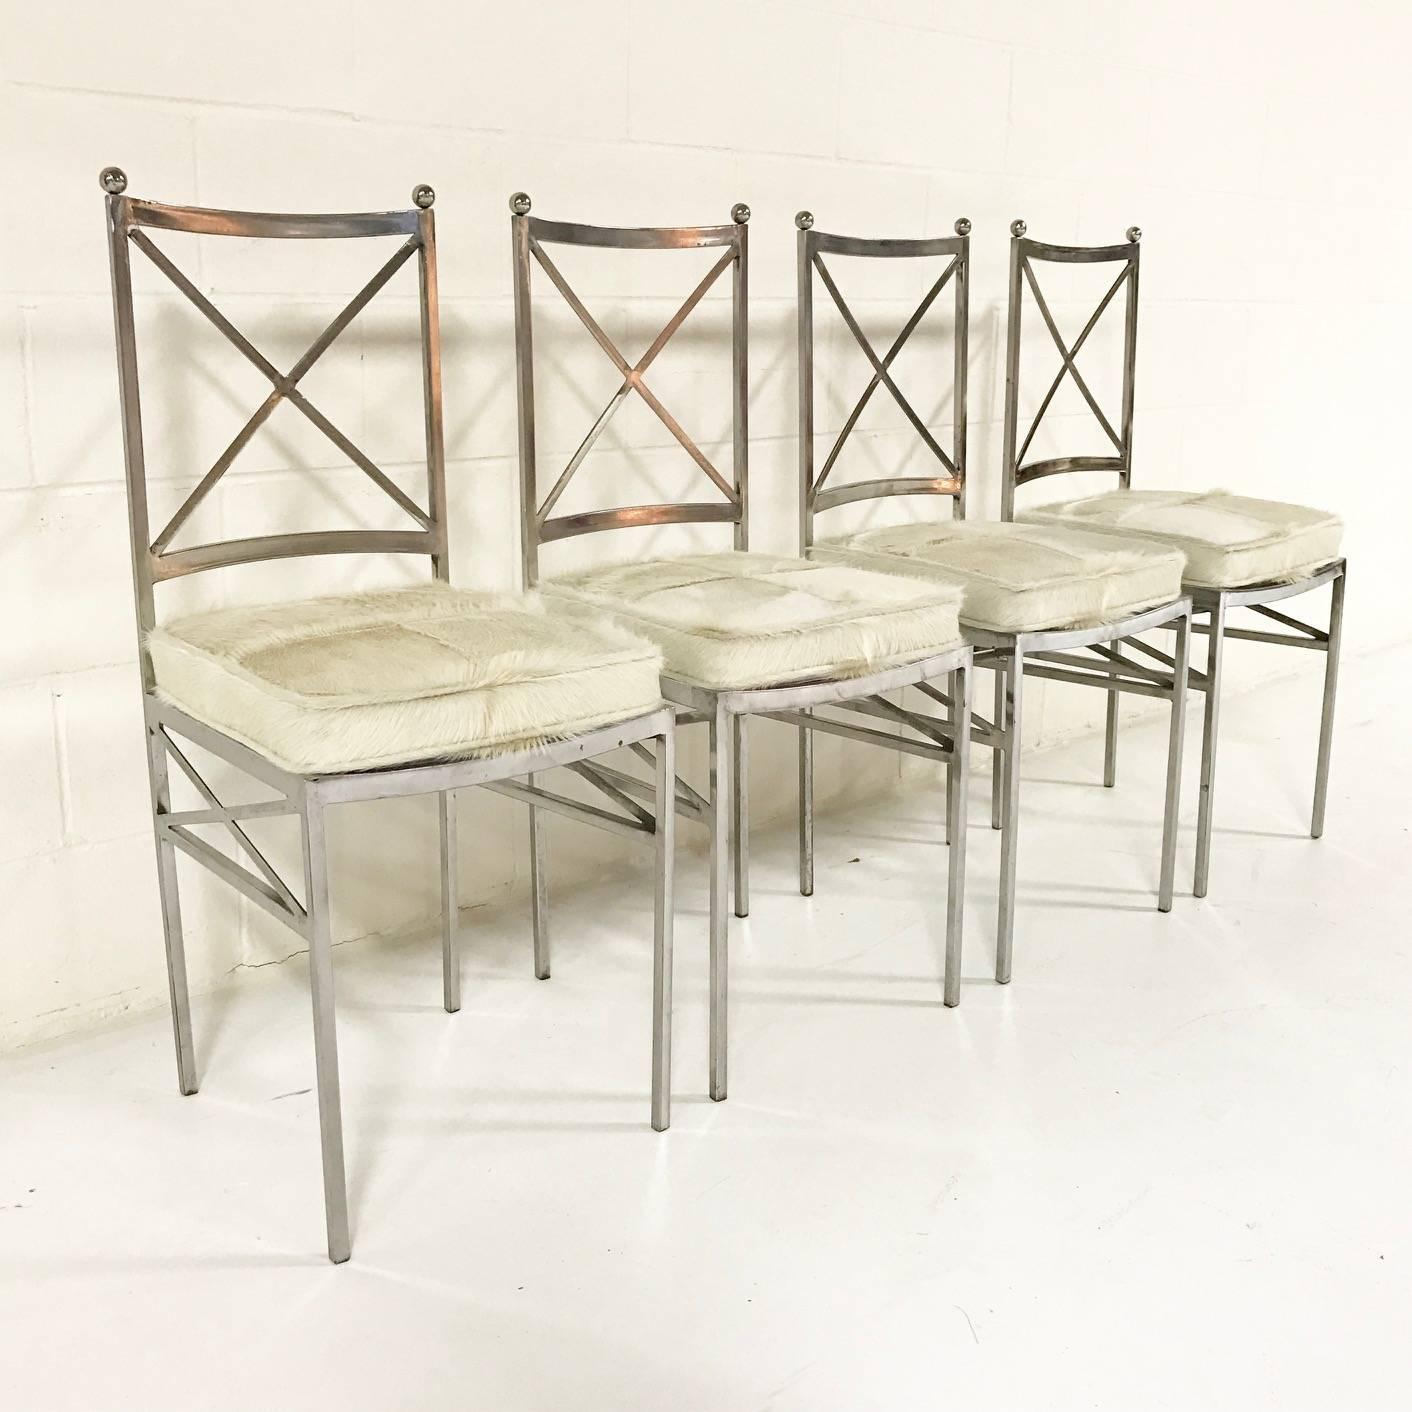 Set of 8 Midcentury Swedish Polished Steel Dining Chairs with Cowhide Cushions For Sale 1